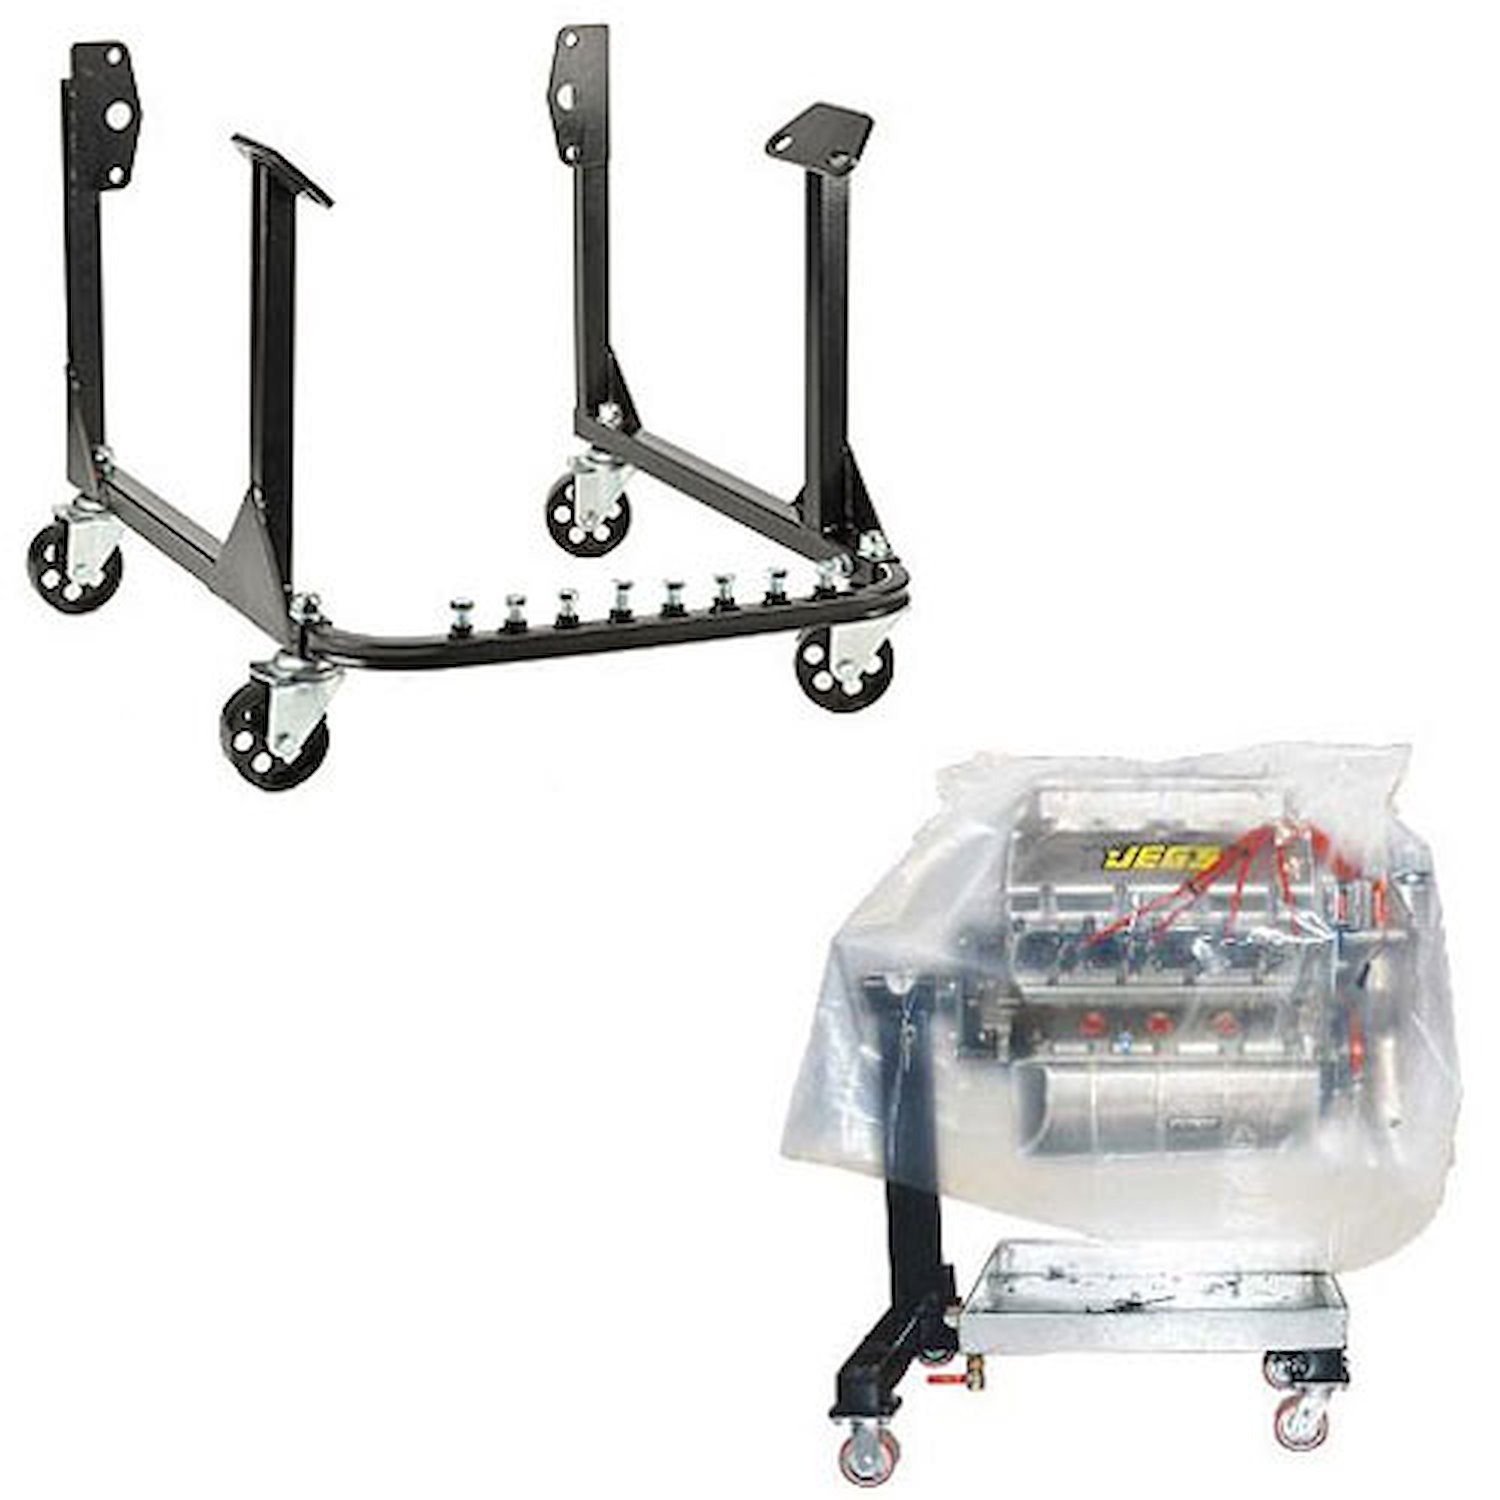 Engine Cradle and Bag Kit for Small Block and Big Block Chevy